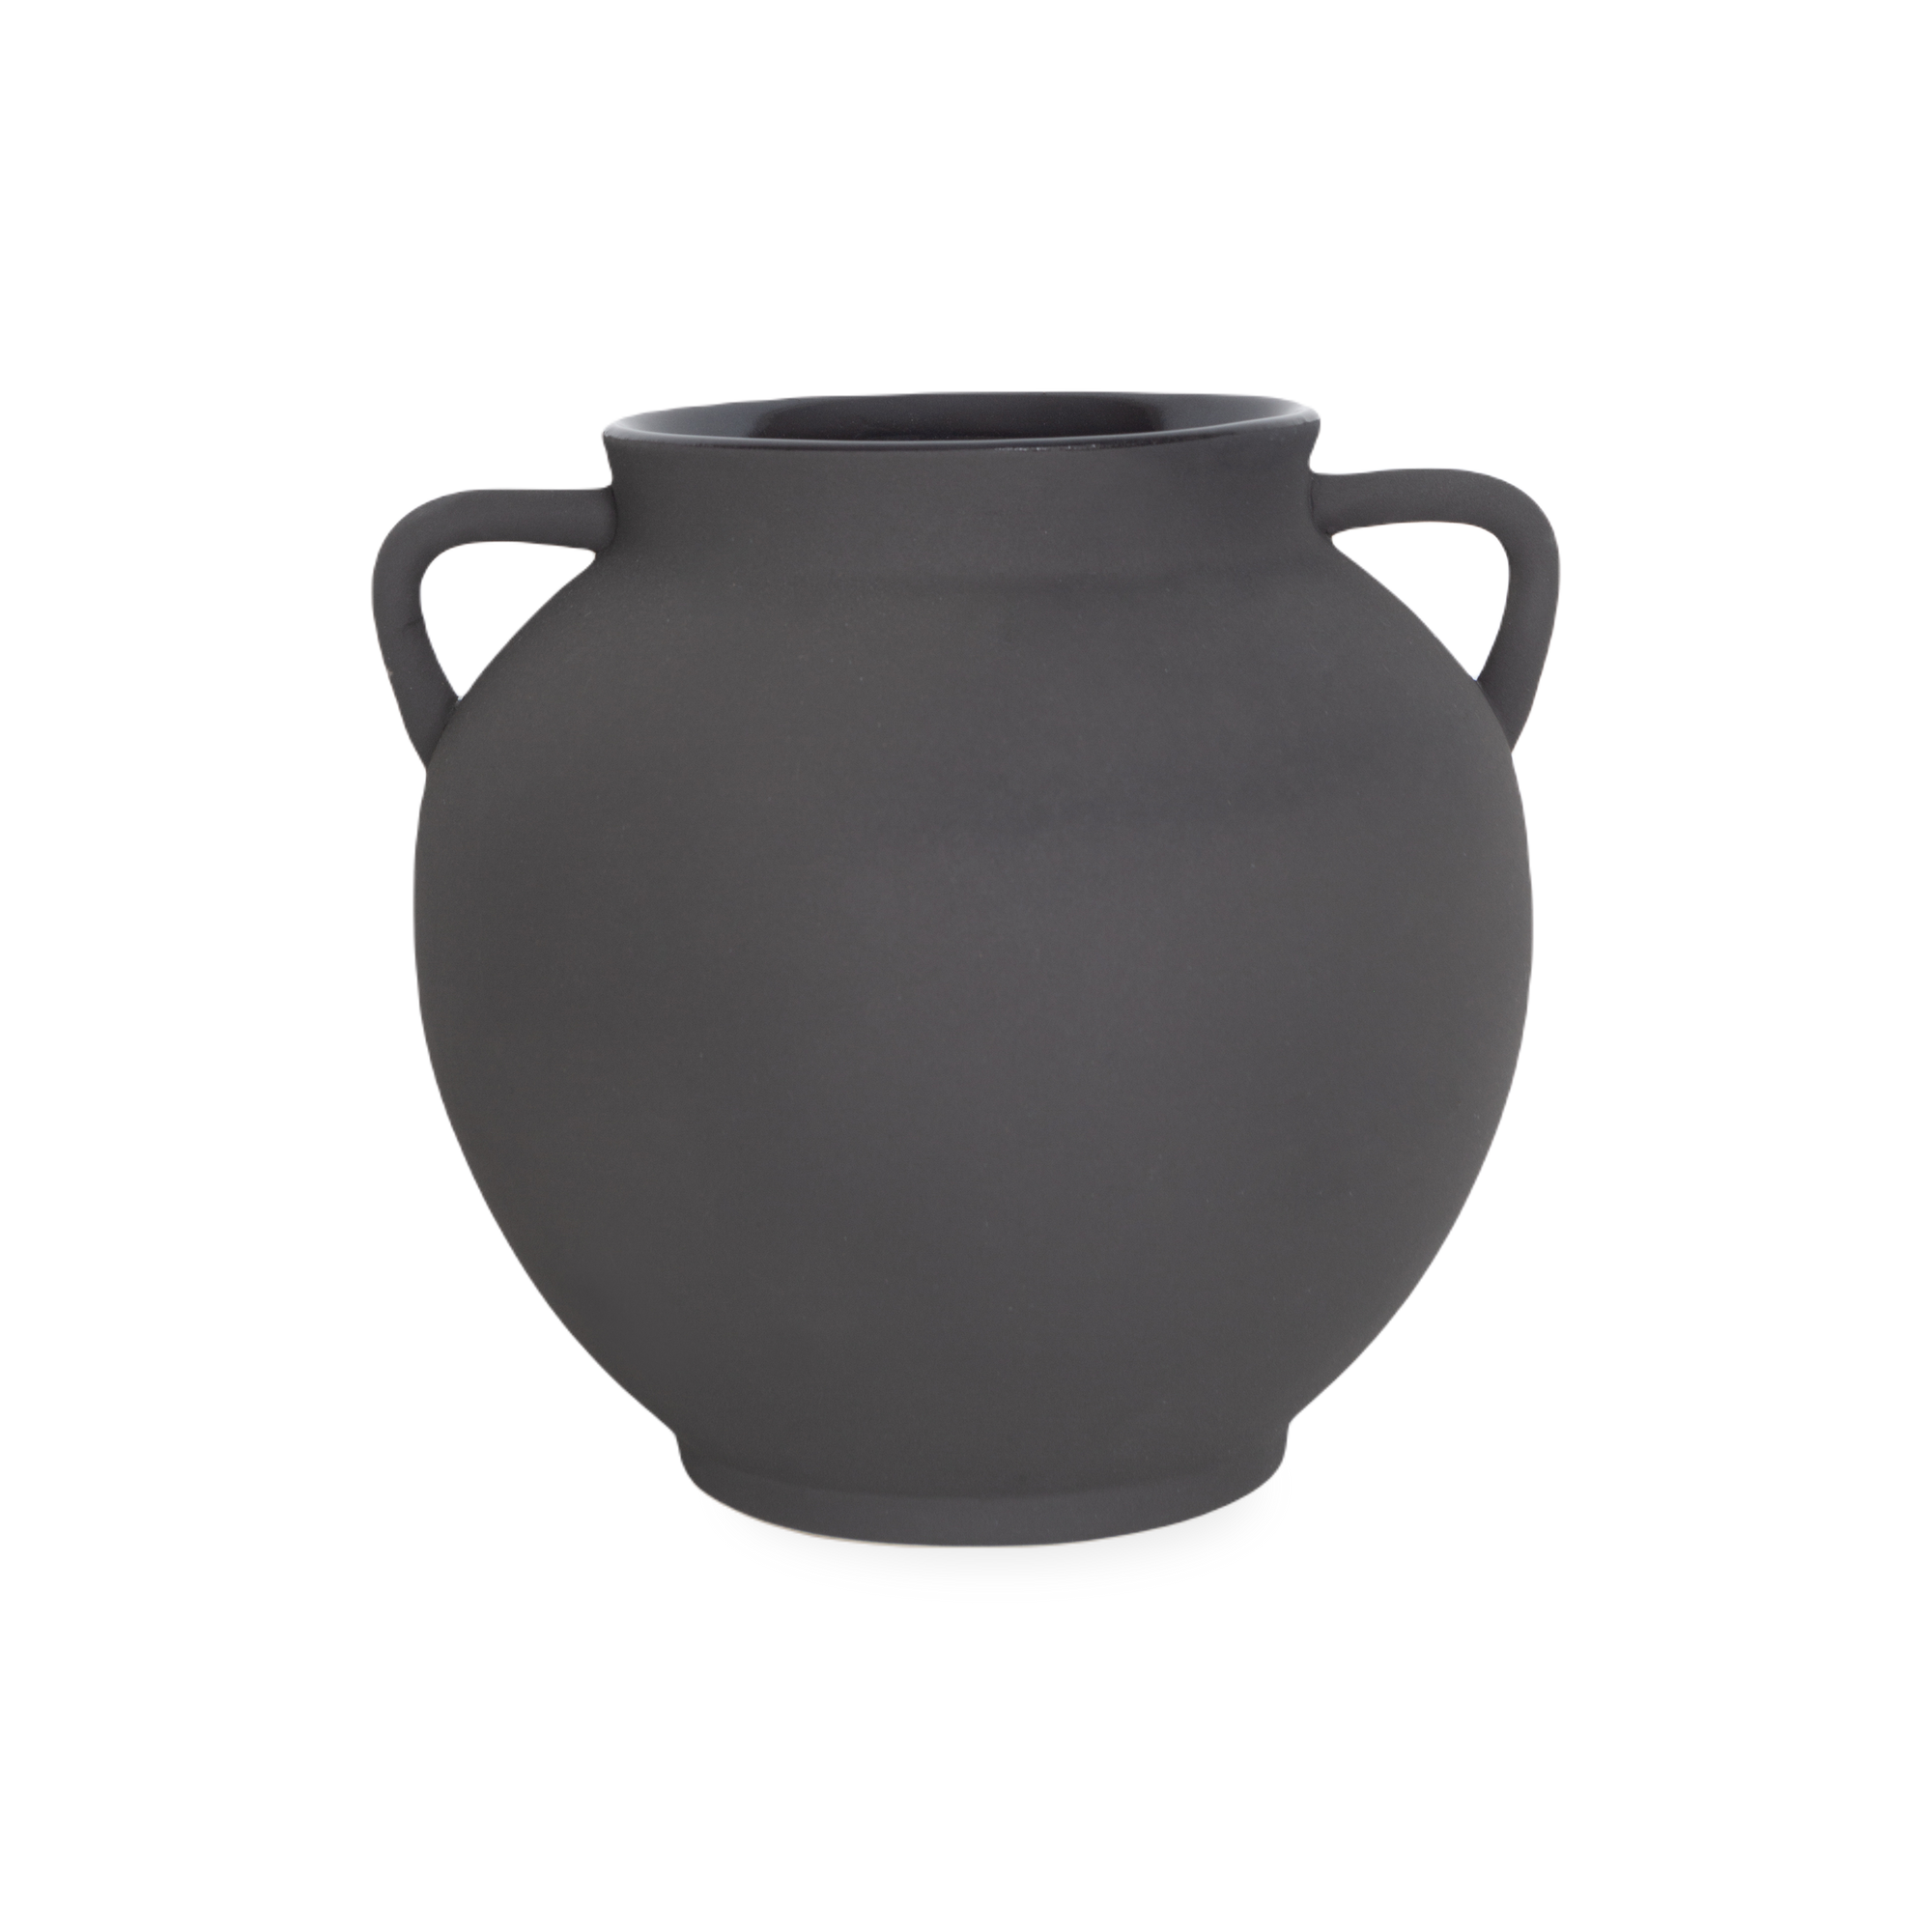 Characterized by its contemporary sculptural design and its matte finish, the Curru Urn provides an earthy aesthetic and can complement many different interior design styles.